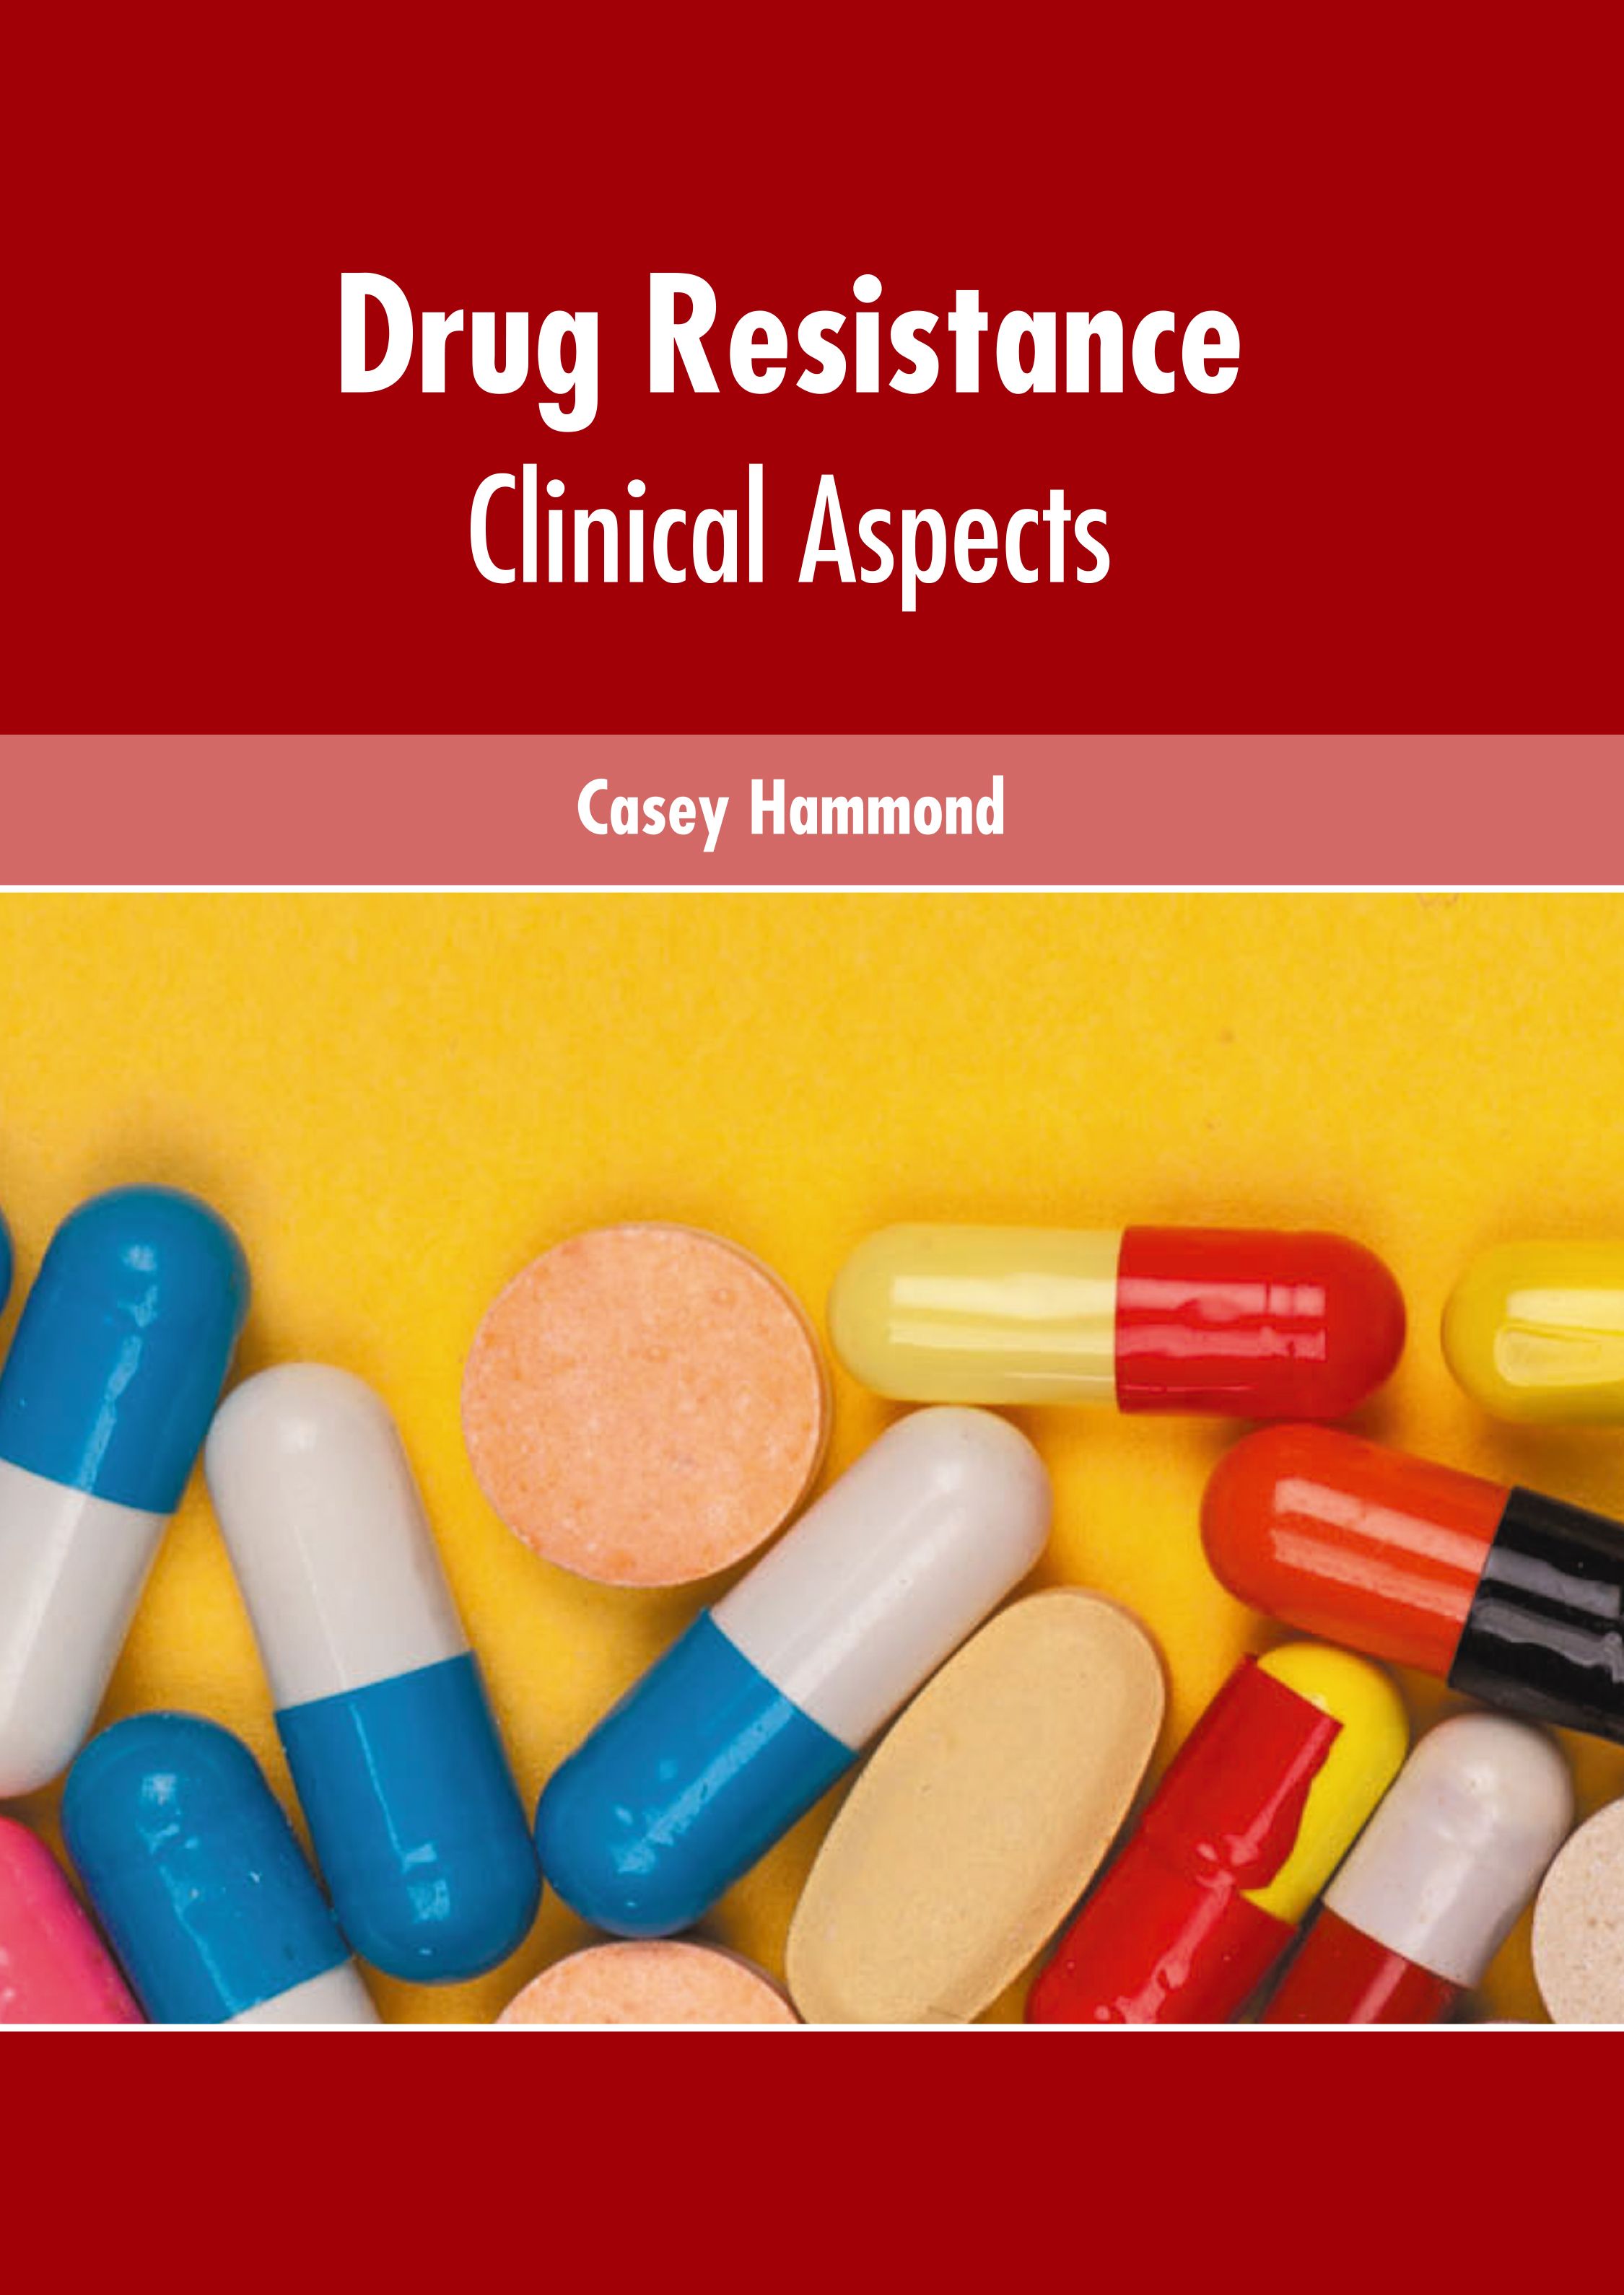 DRUG RESISTANCE: CLINICAL ASPECTS- ISBN: 9781639272105